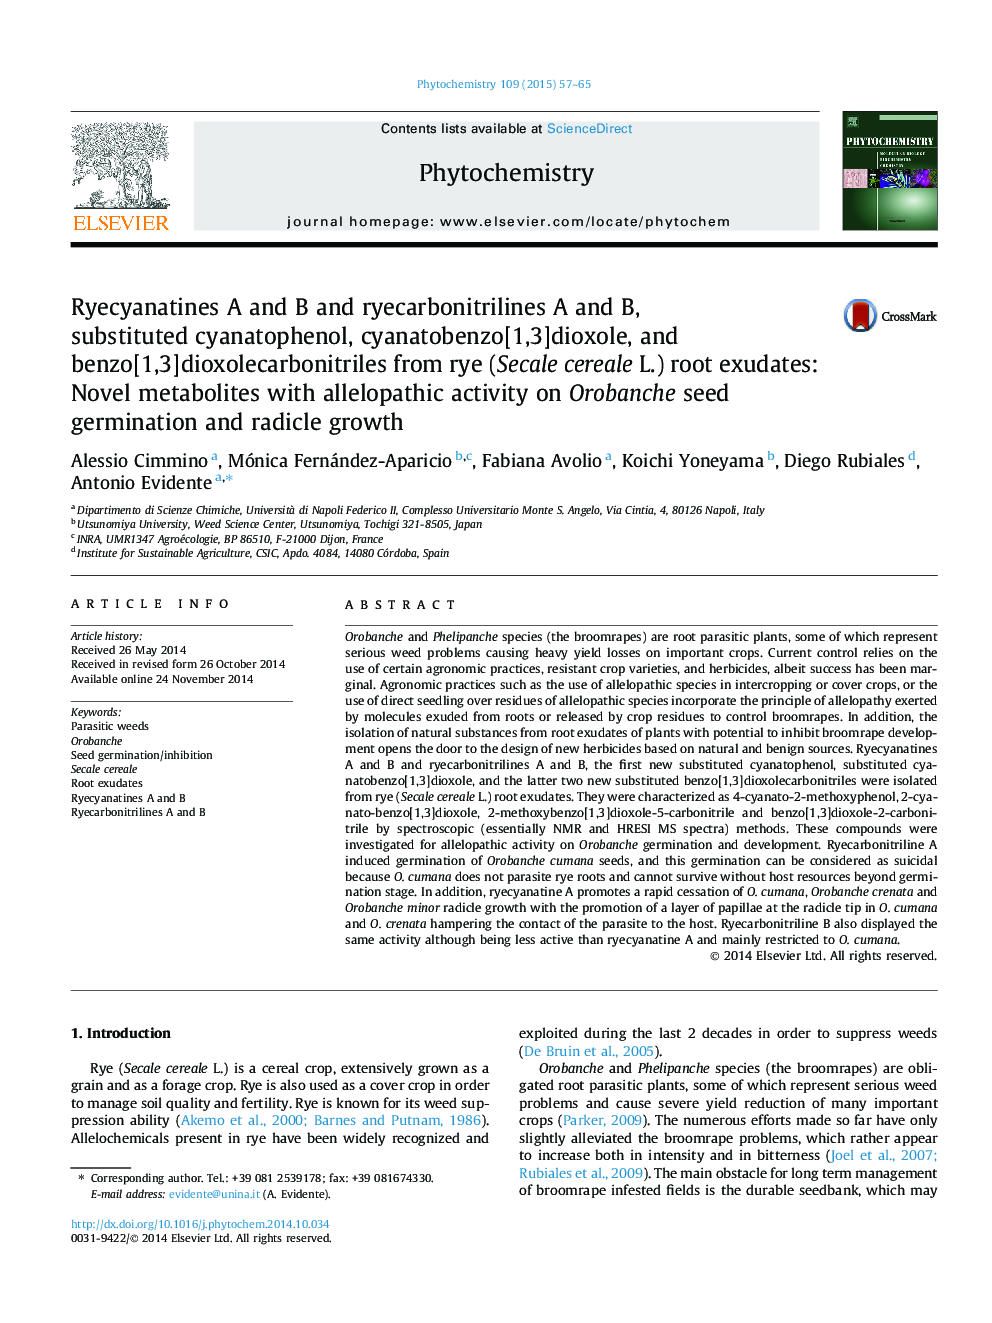 Ryecyanatines A and B and ryecarbonitrilines A and B, substituted cyanatophenol, cyanatobenzo[1,3]dioxole, and benzo[1,3]dioxolecarbonitriles from rye (Secale cereale L.) root exudates: Novel metabolites with allelopathic activity on Orobanche seed germin